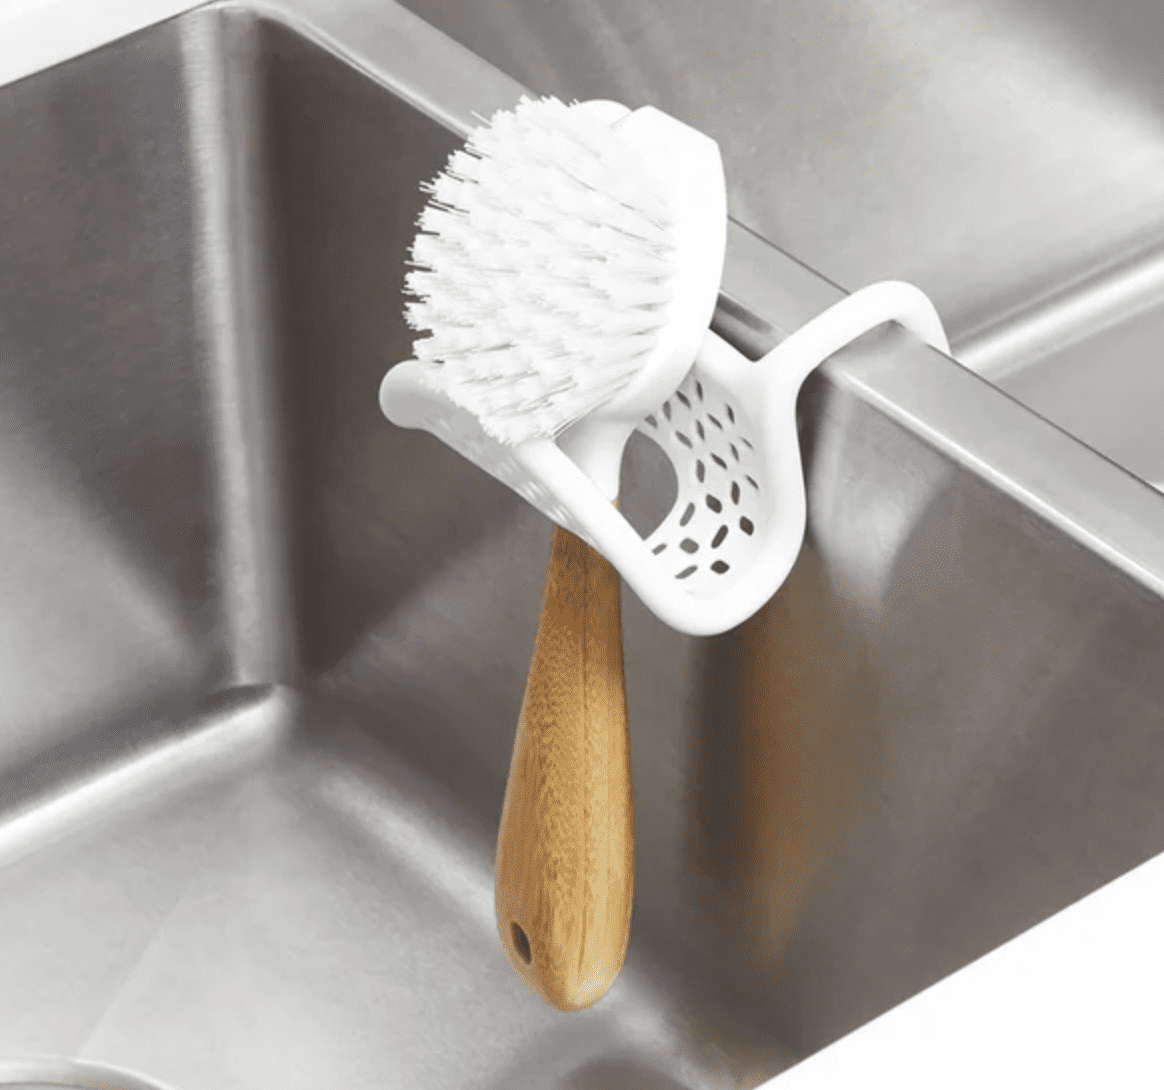 Sling Flexible Sink Caddy, Non-slip – Holds Sponge and Scrubbing